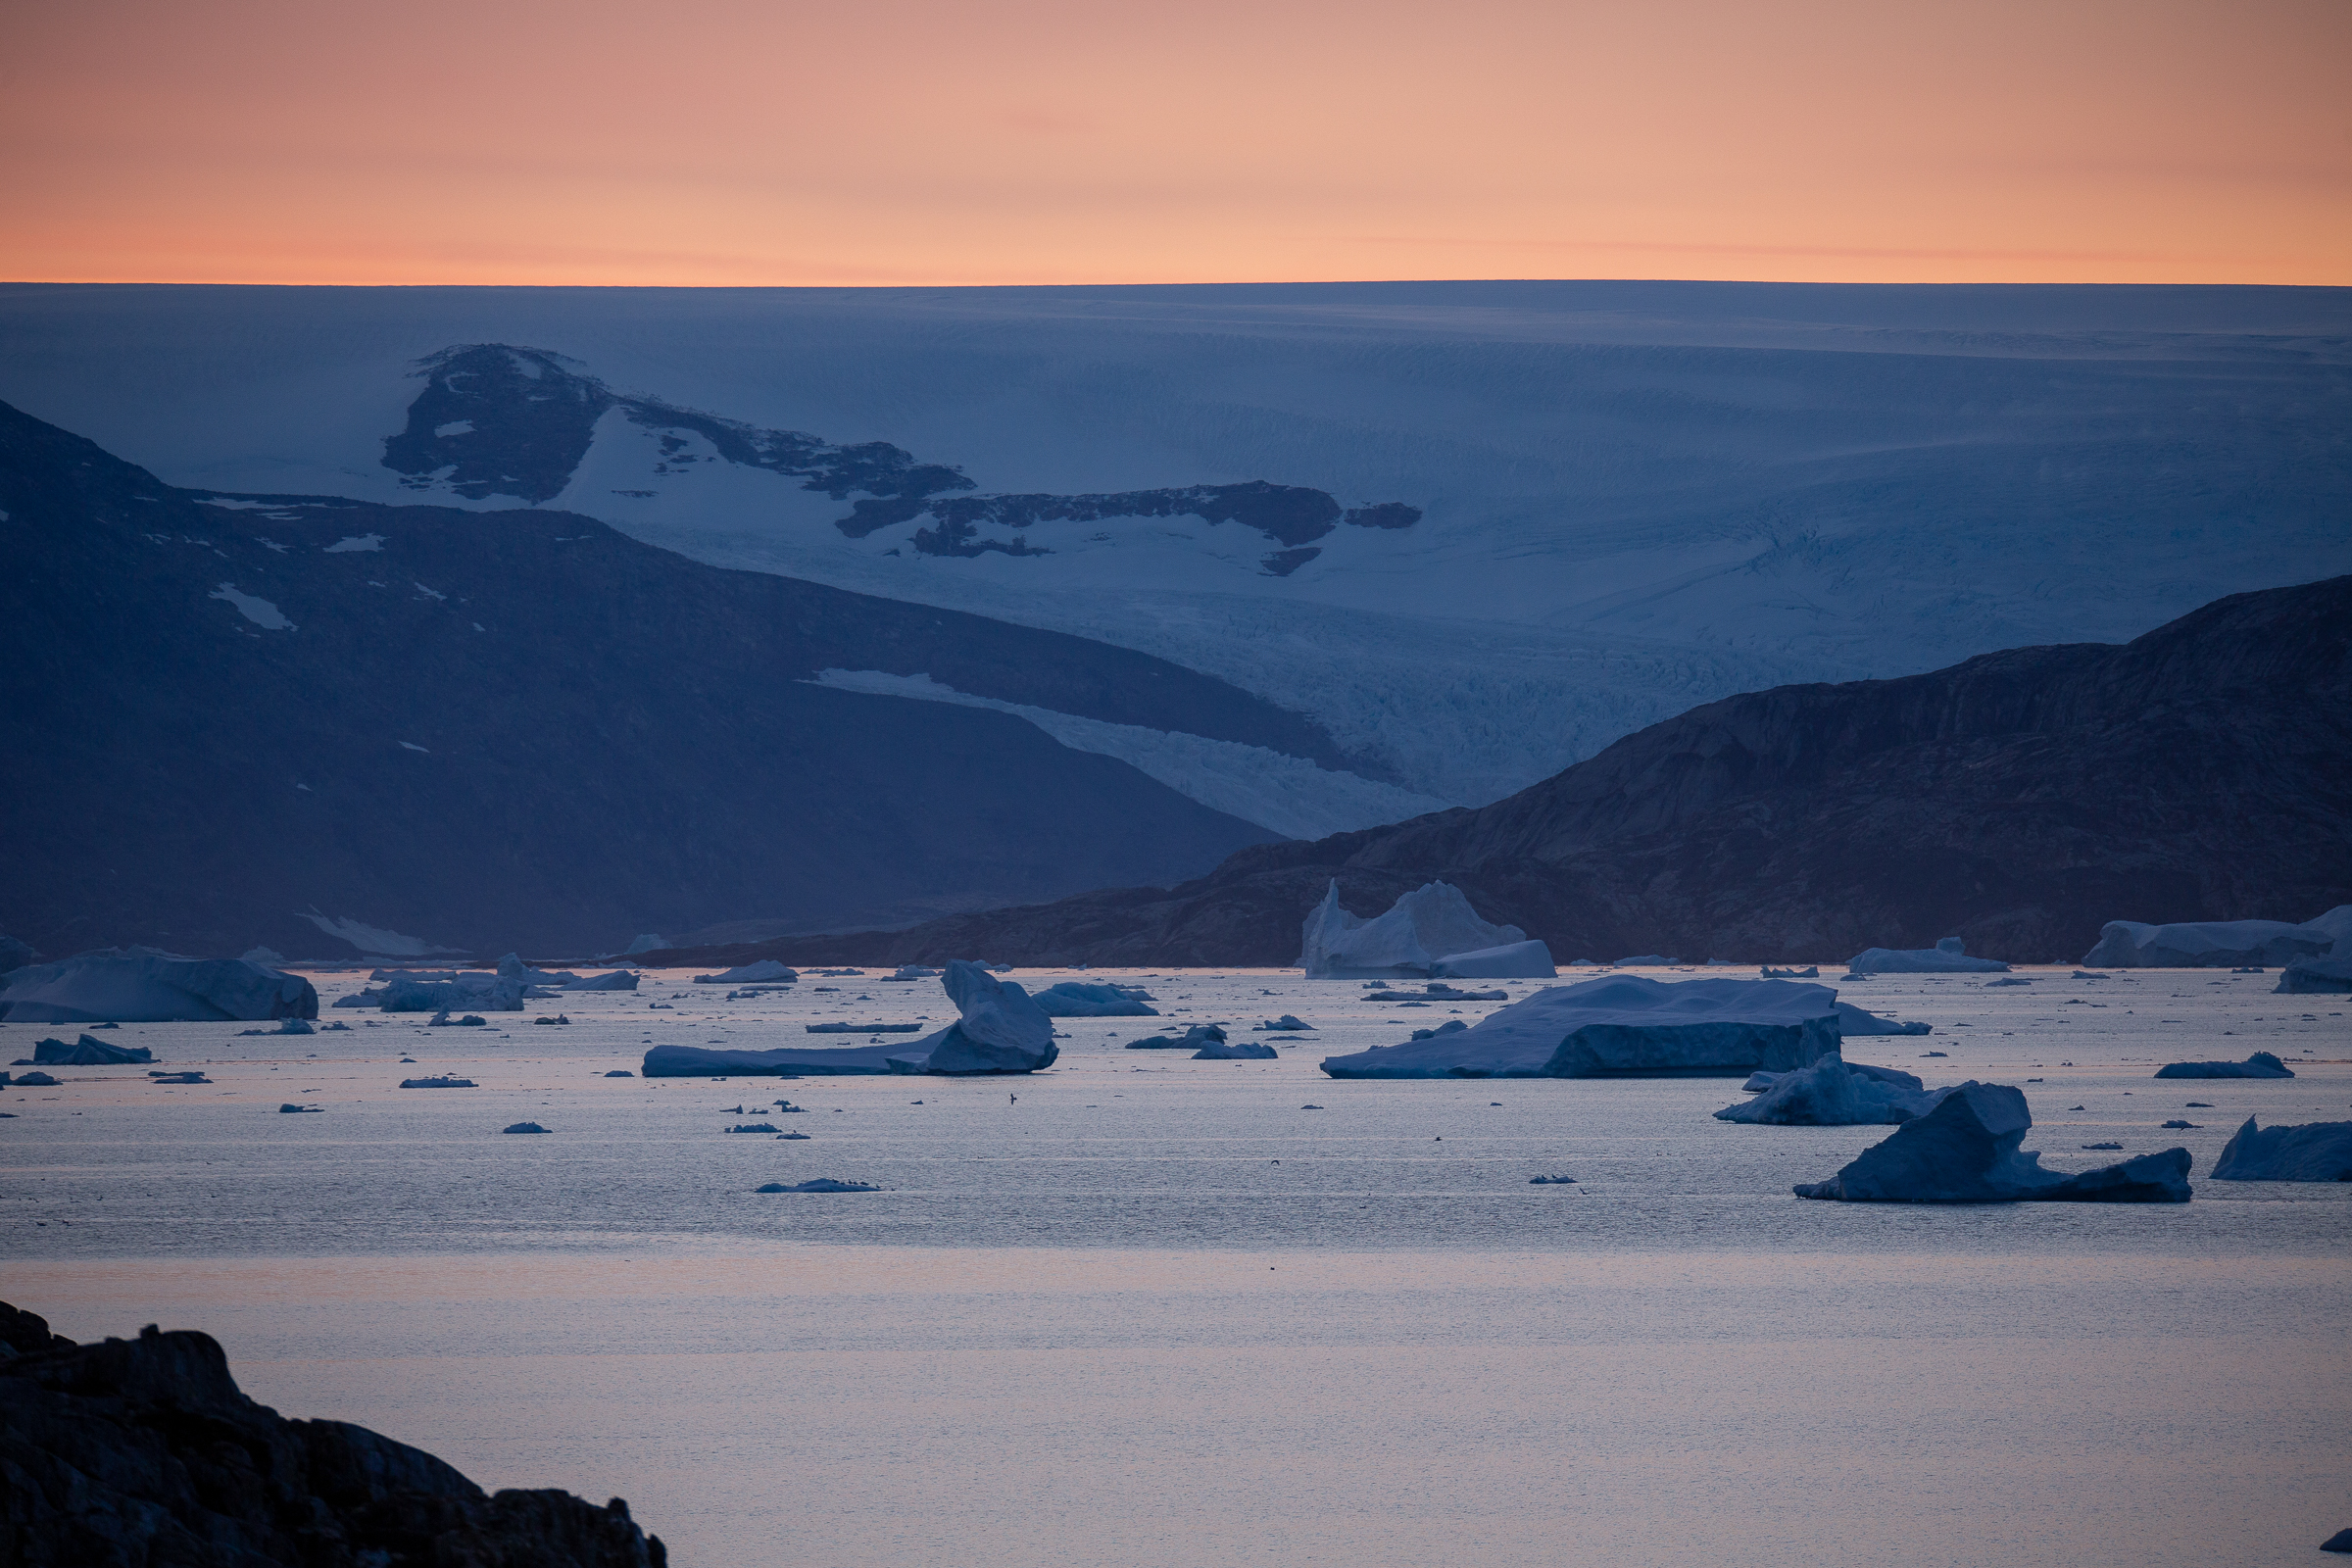 View over glaciers and icebergs. Photo by Lars Anker Moeller - Visit East Greenland